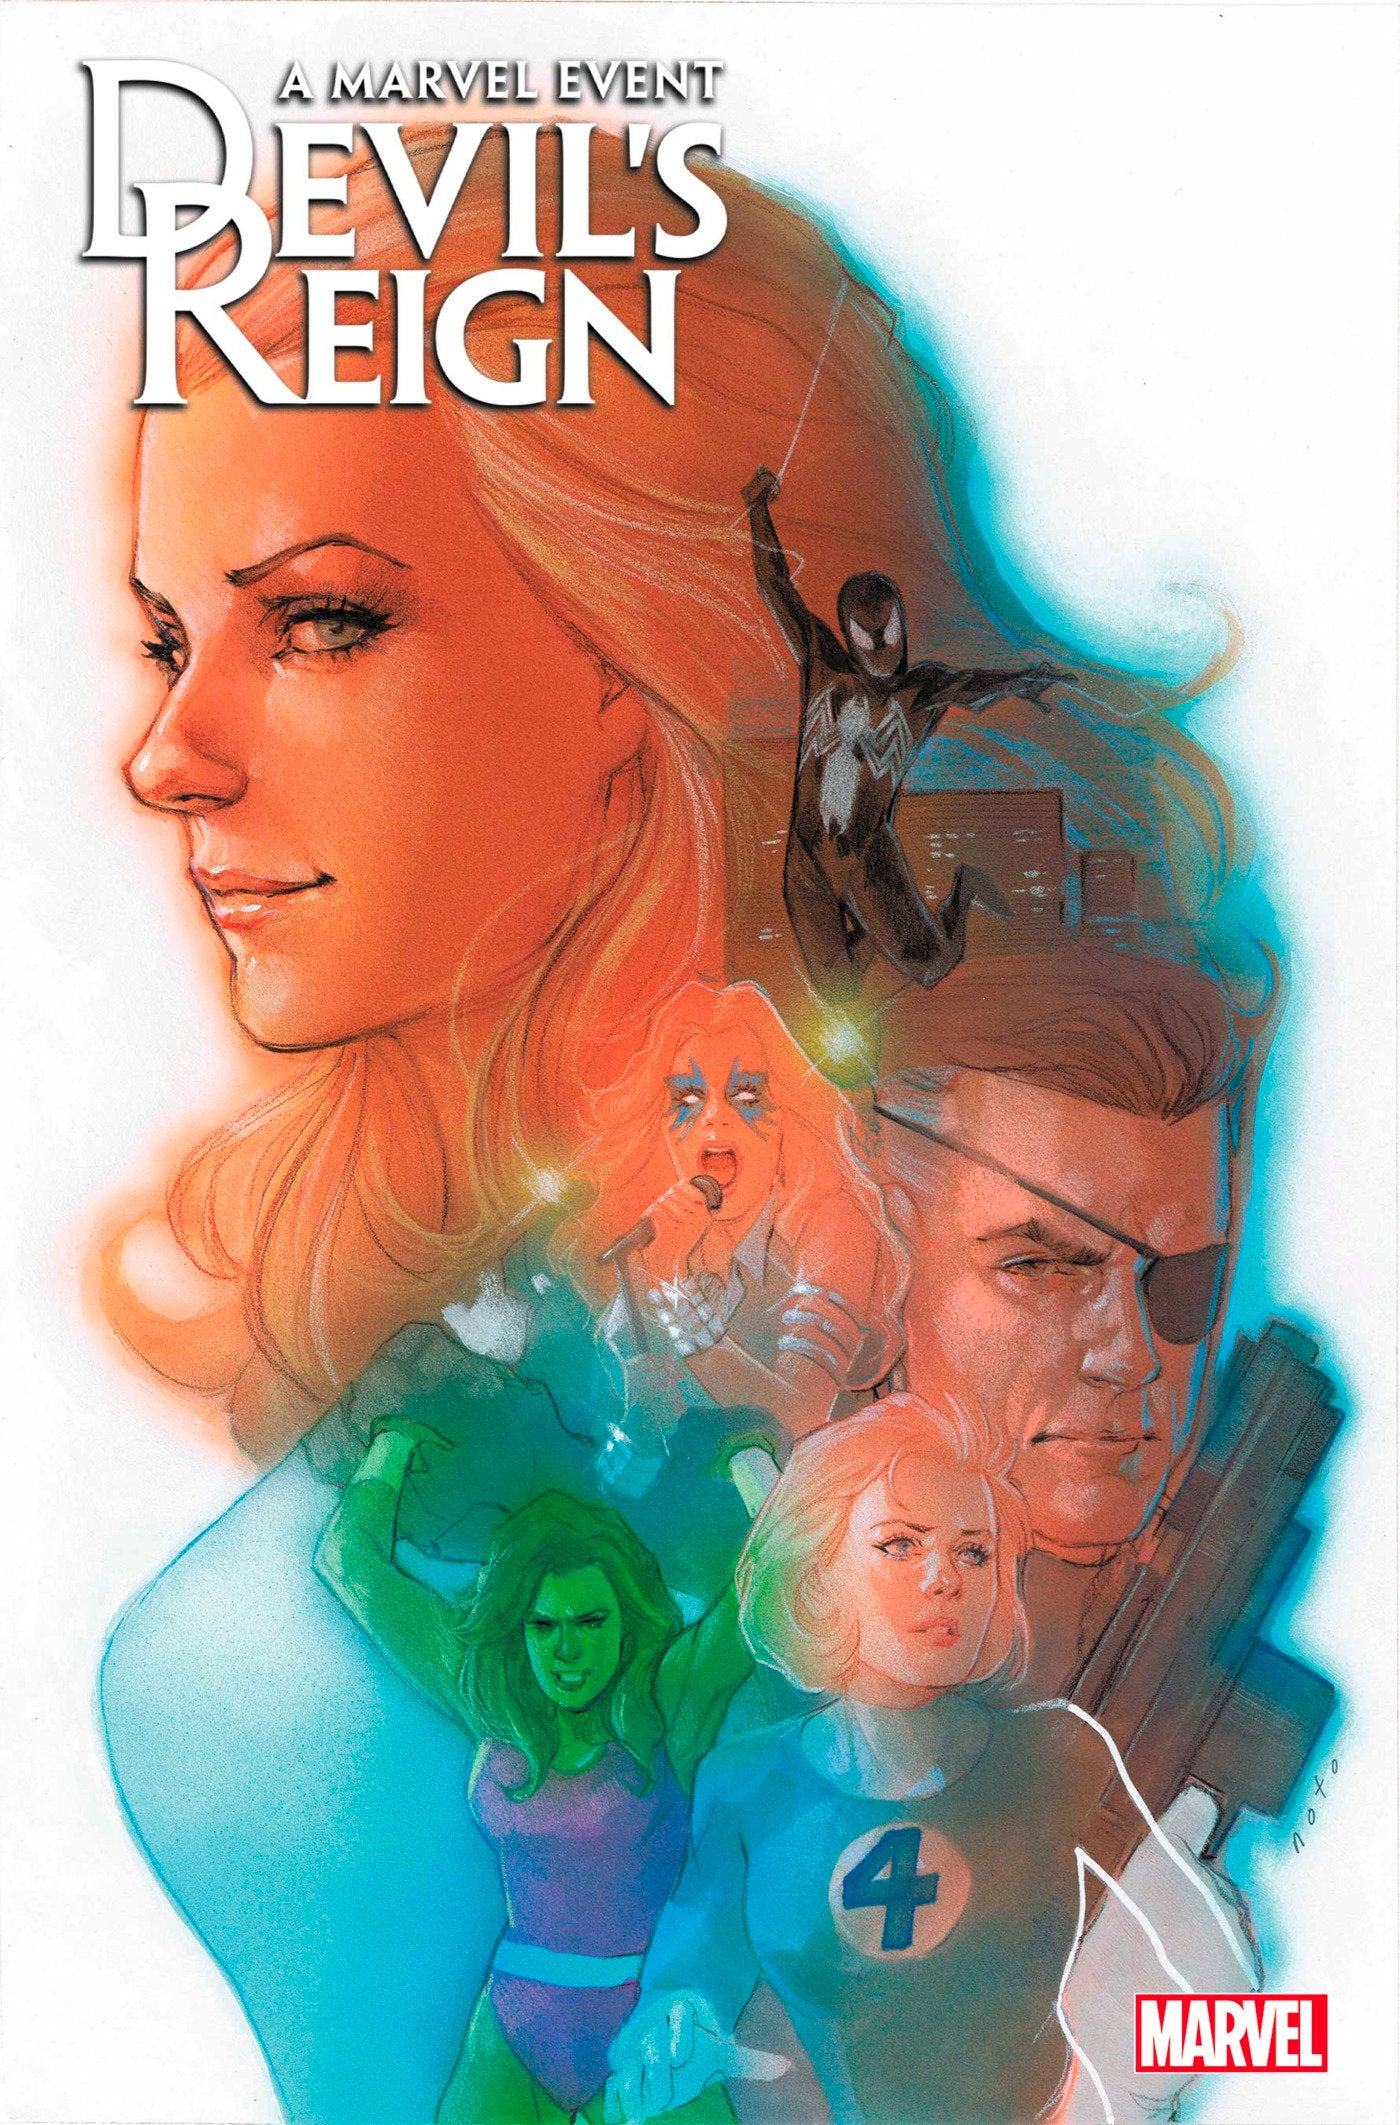 Image of Devil'S Reign: X-Men 2 comic sold by Stronghold Collectibles.